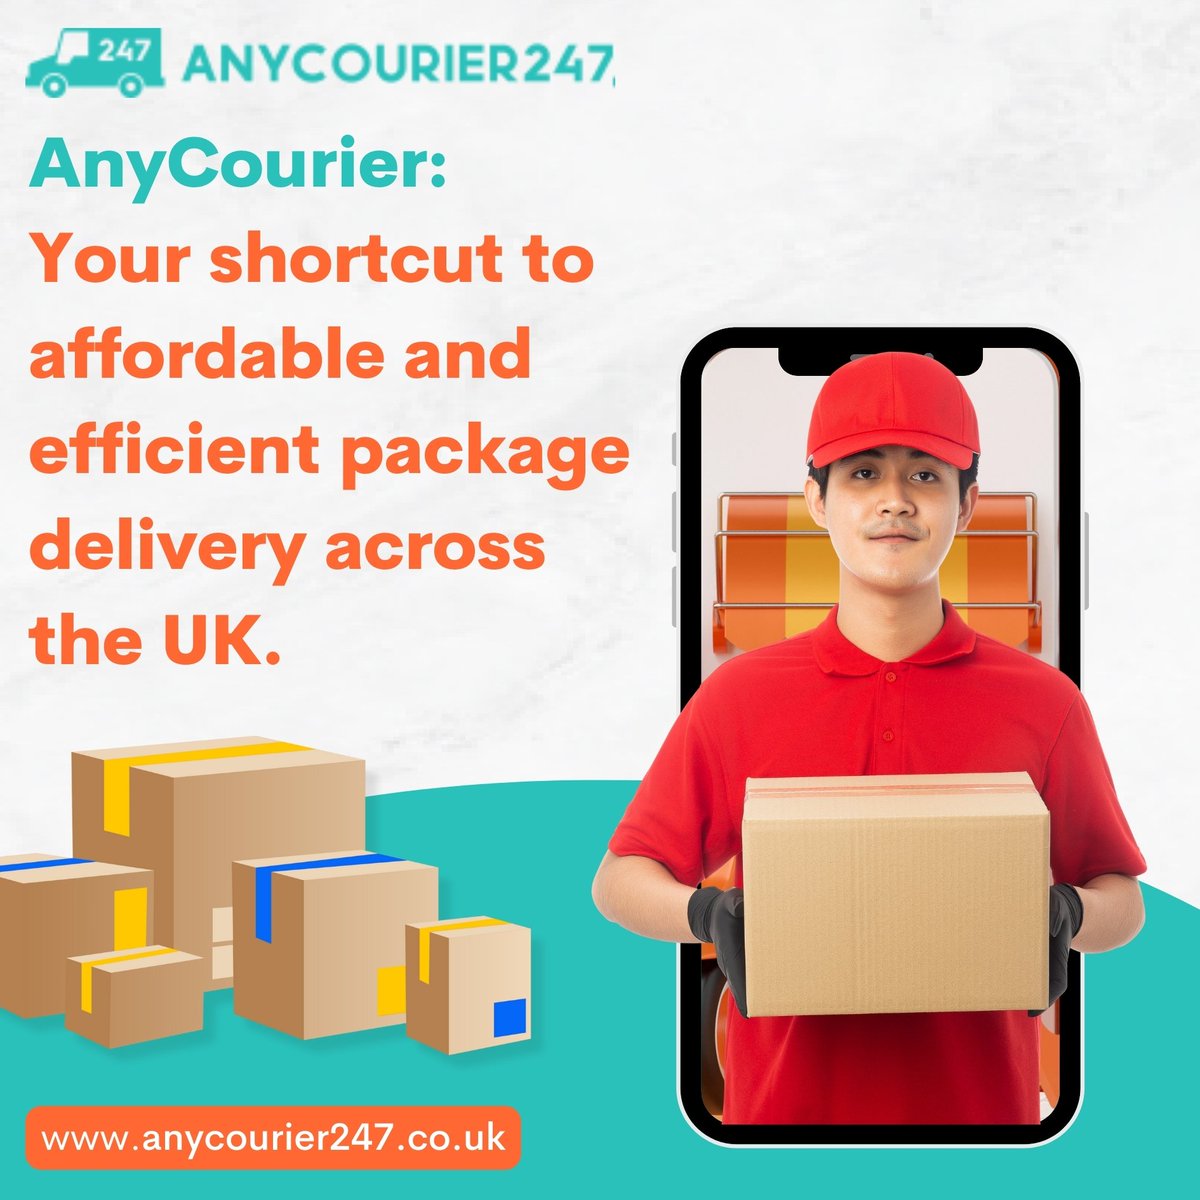 Introducing AnyCourier! 📦 Your go-to for affordable and efficient package delivery across the UK. 🇬🇧 Say goodbye to worries about shipping costs and delays— we've got you covered every step of the way! 💼#AnyCourier #UKDelivery #anycourier247 #couriermarketplace #trustedcouriers